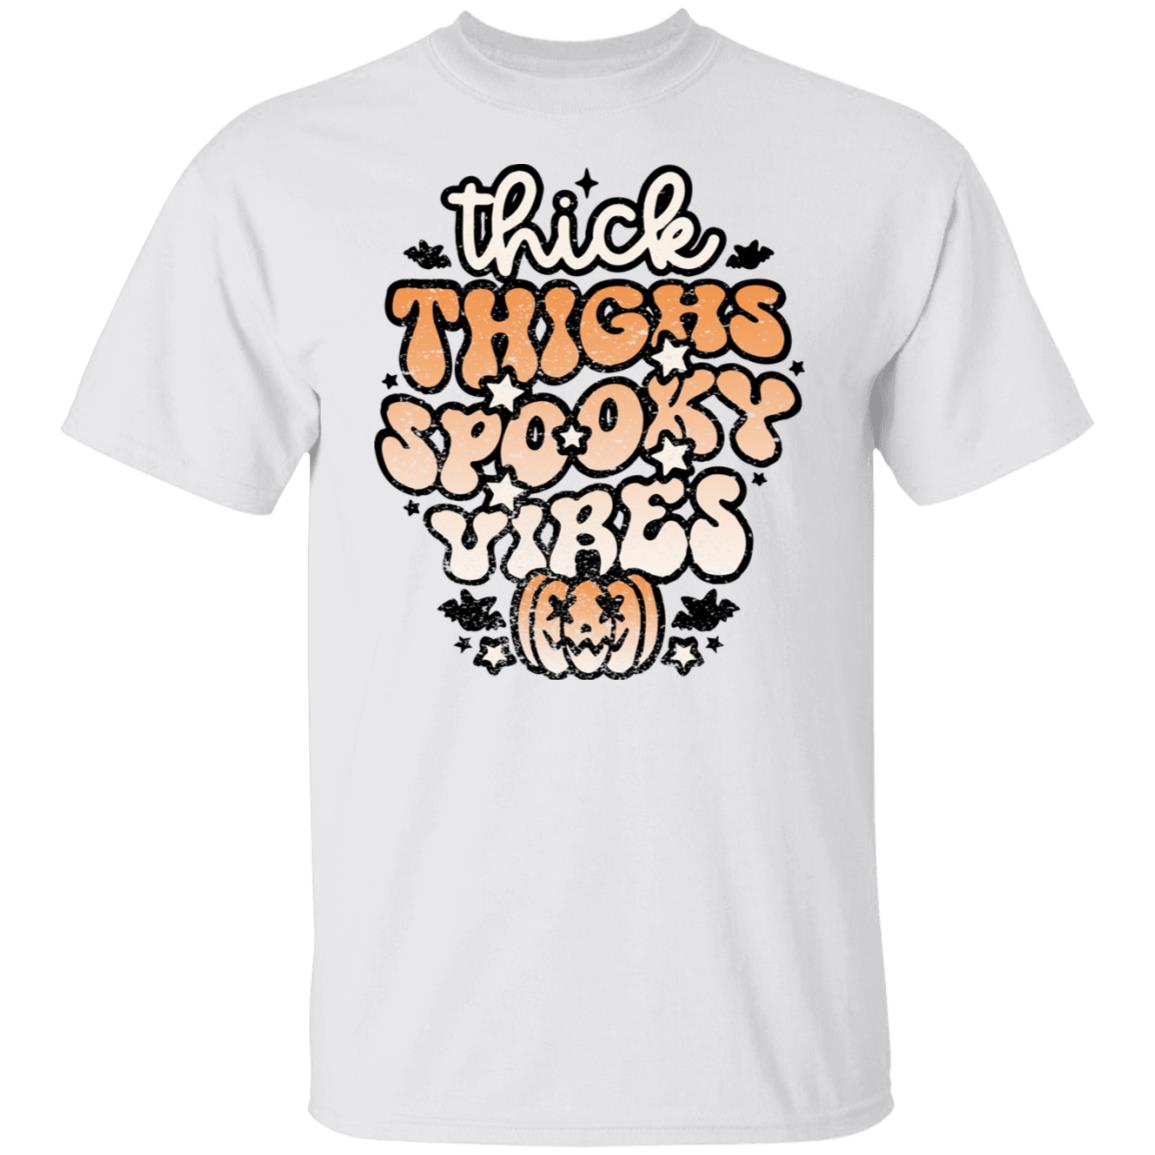 thick thighs and spooky vibes halloween shirt for women shirt